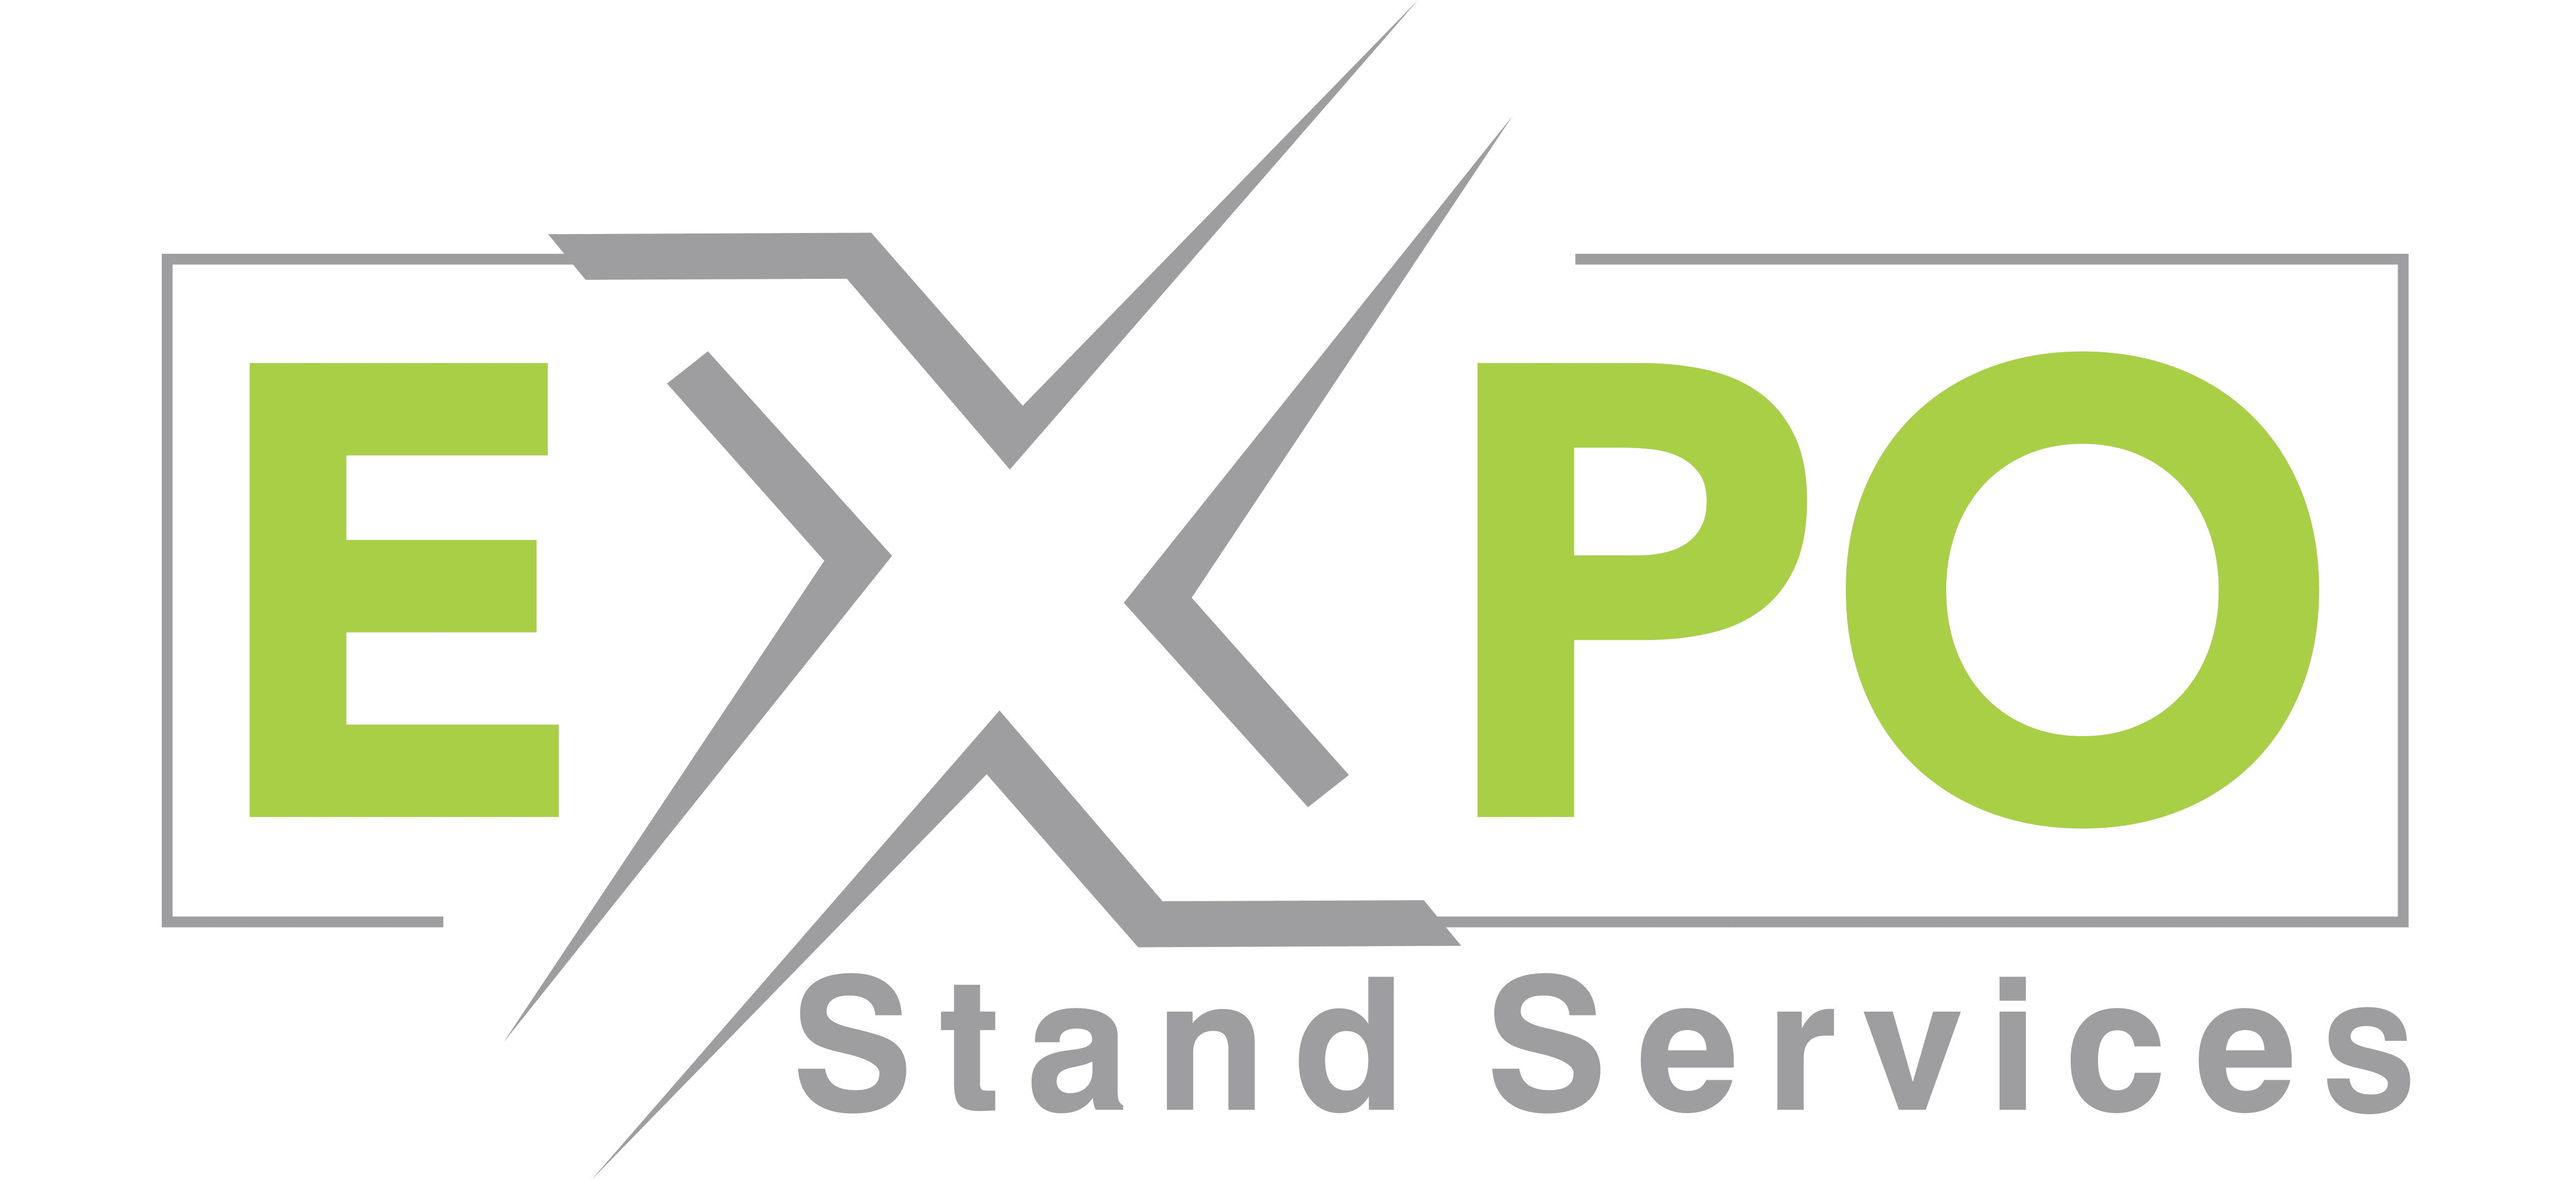 Expo_Stand_services